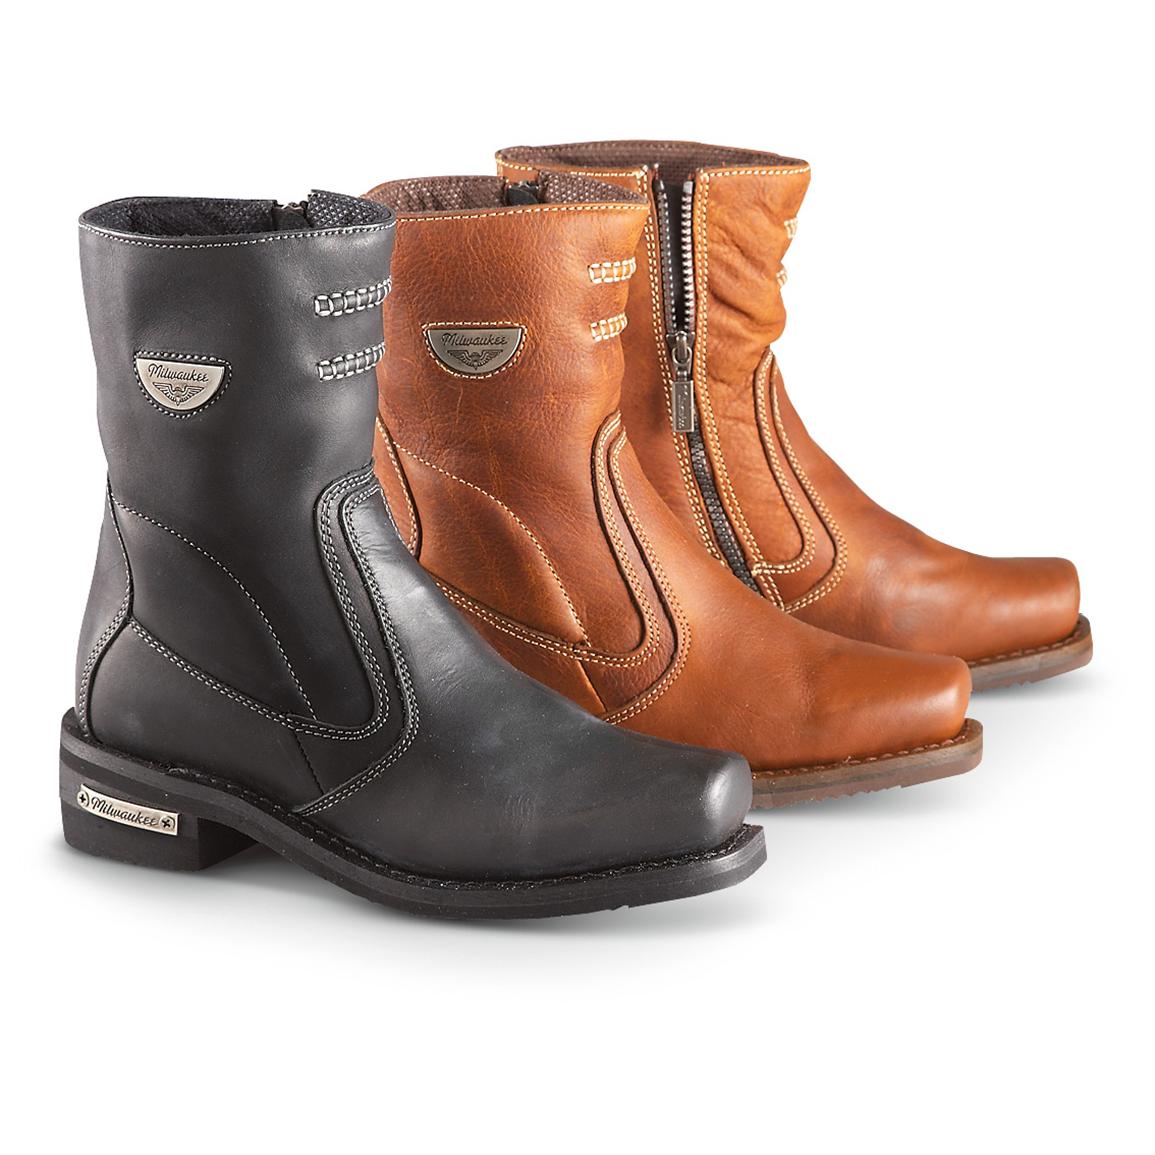 Women's Milwaukee® Shifter Motorcycle Boots - 232412, Motorcycle & Biker Boots at Sportsman's Guide